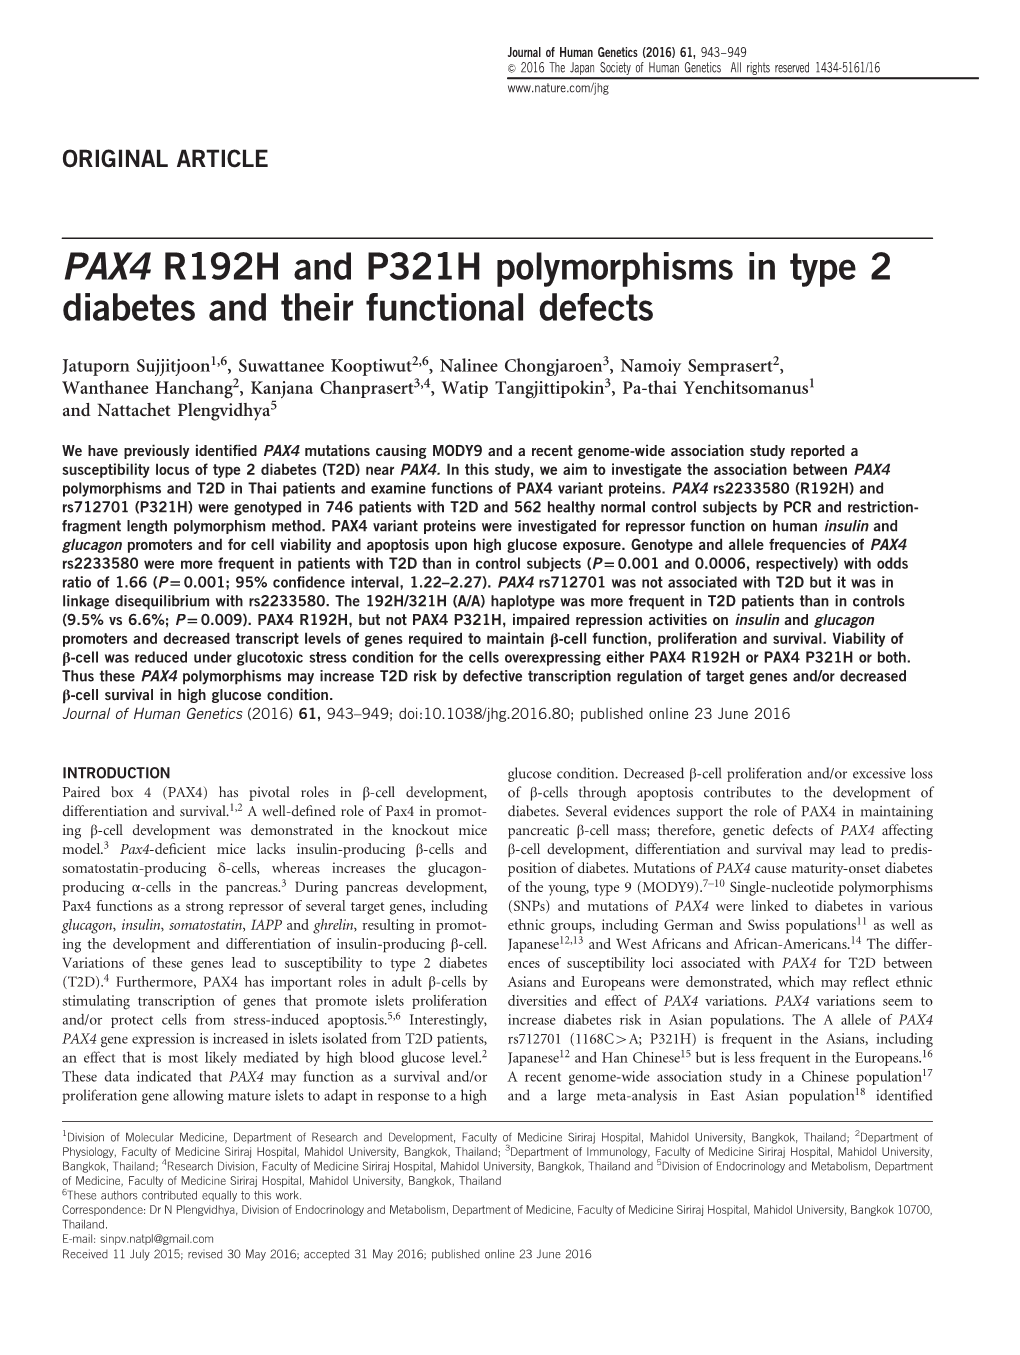 PAX4 R192H and P321H Polymorphisms in Type 2 Diabetes and Their Functional Defects